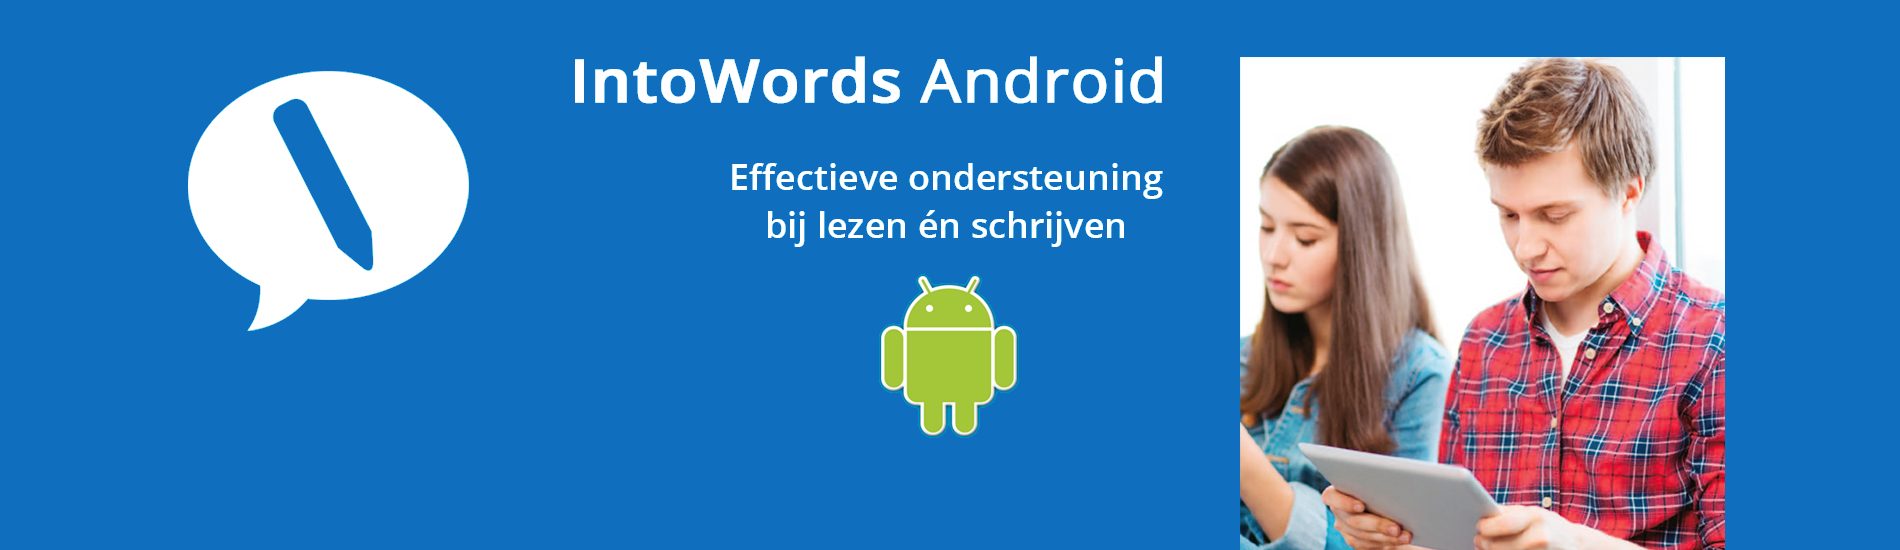 slider intowords android